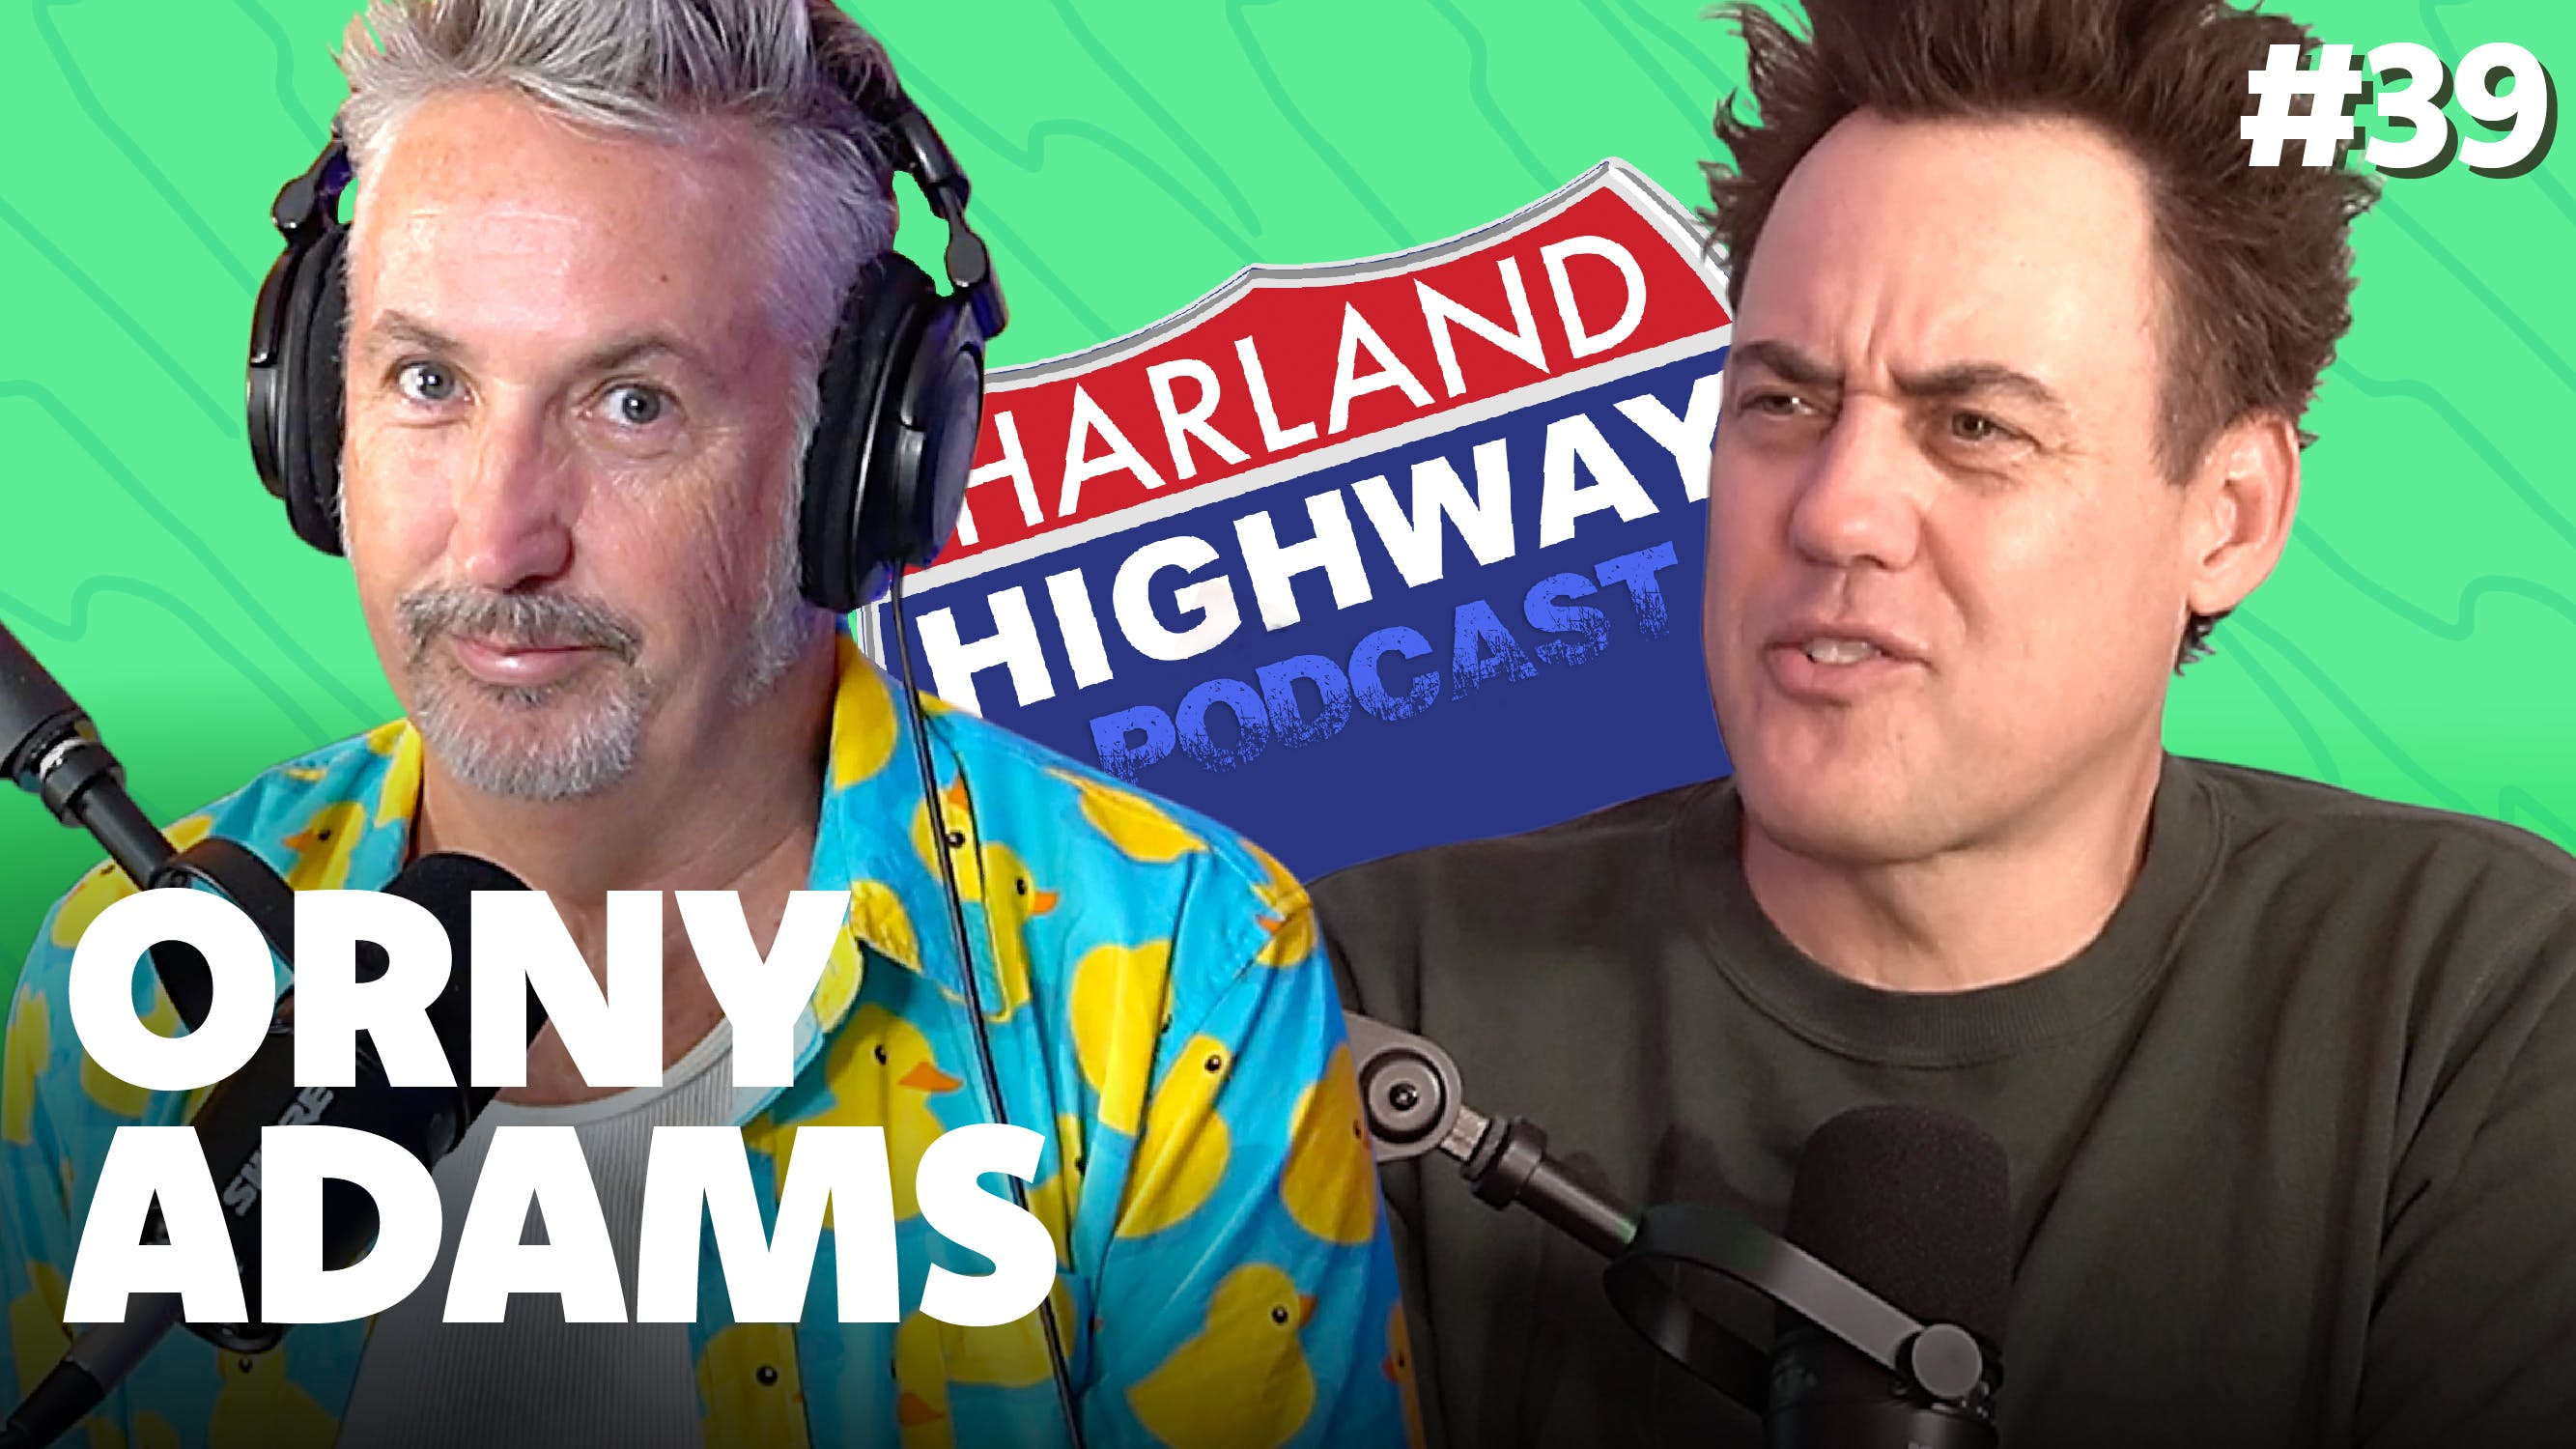 NEW HARLAND HIGHWAY #39 - ORNY ADAMS, Comedian, Podcaster